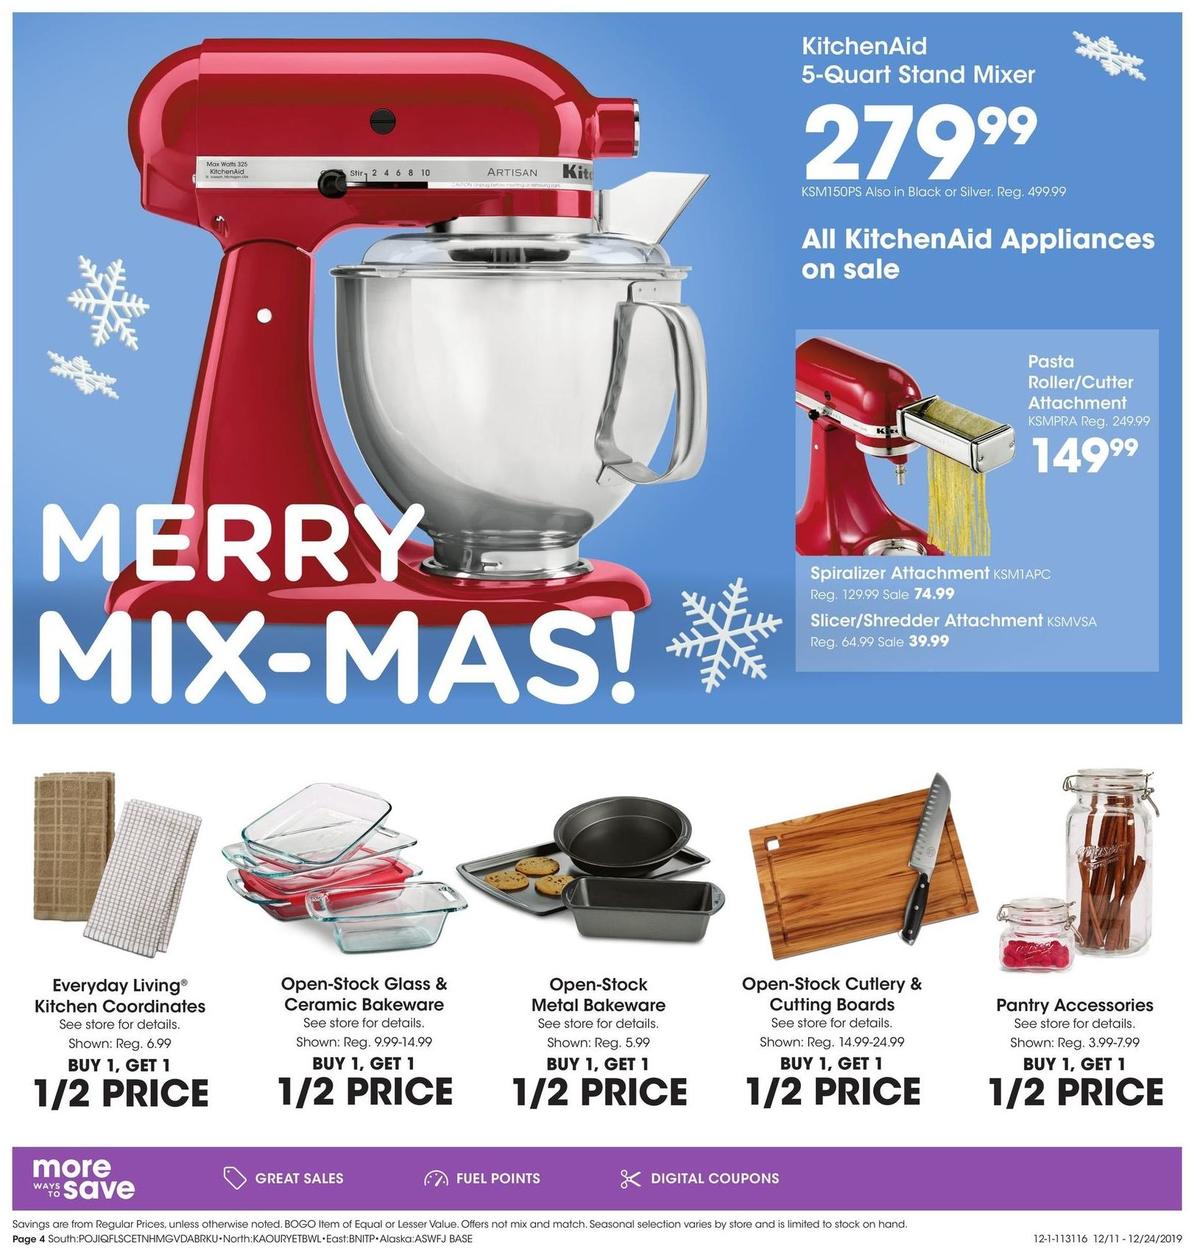 Fred Meyer Home and Gift Ideas Weekly Ad from December 11